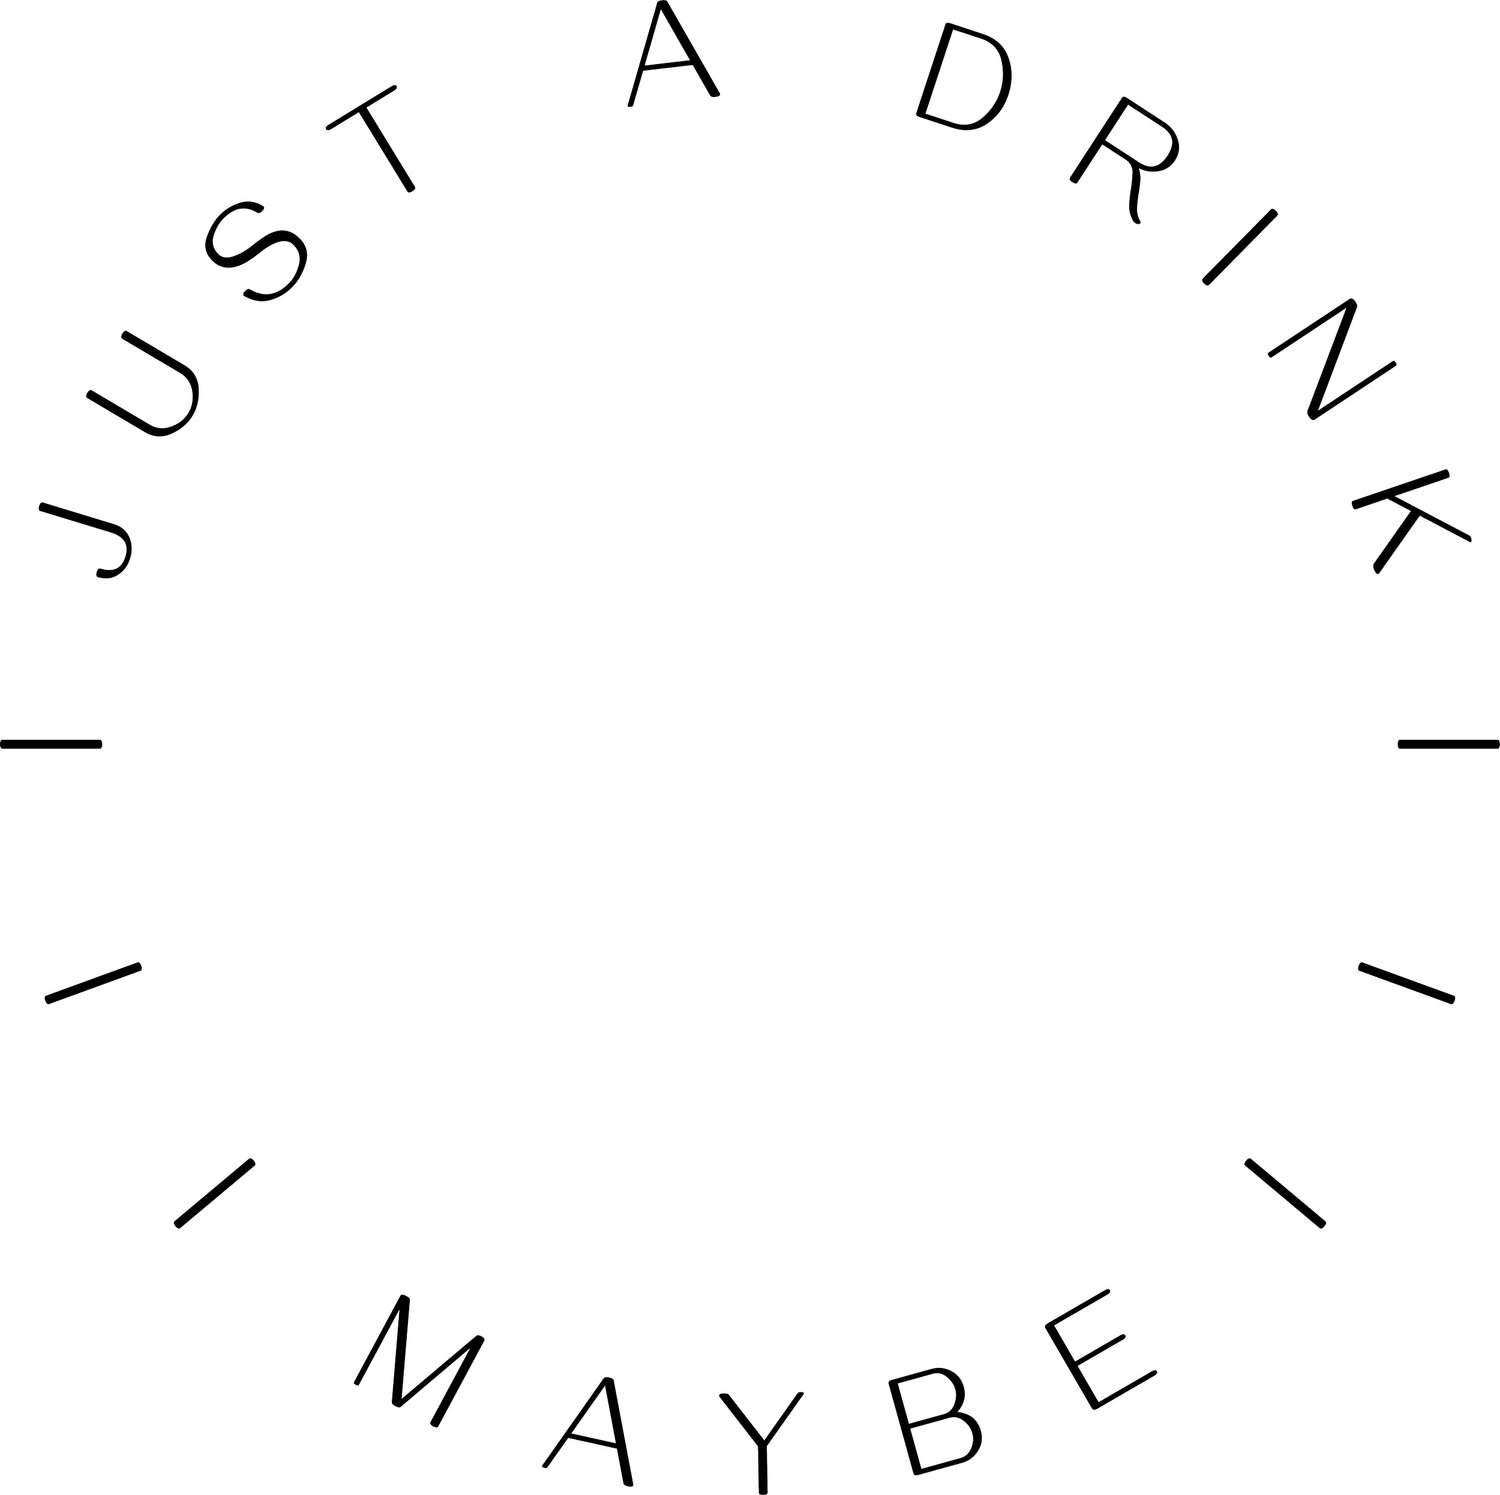 Just A Drink (Maybe) - Bagel Cafe